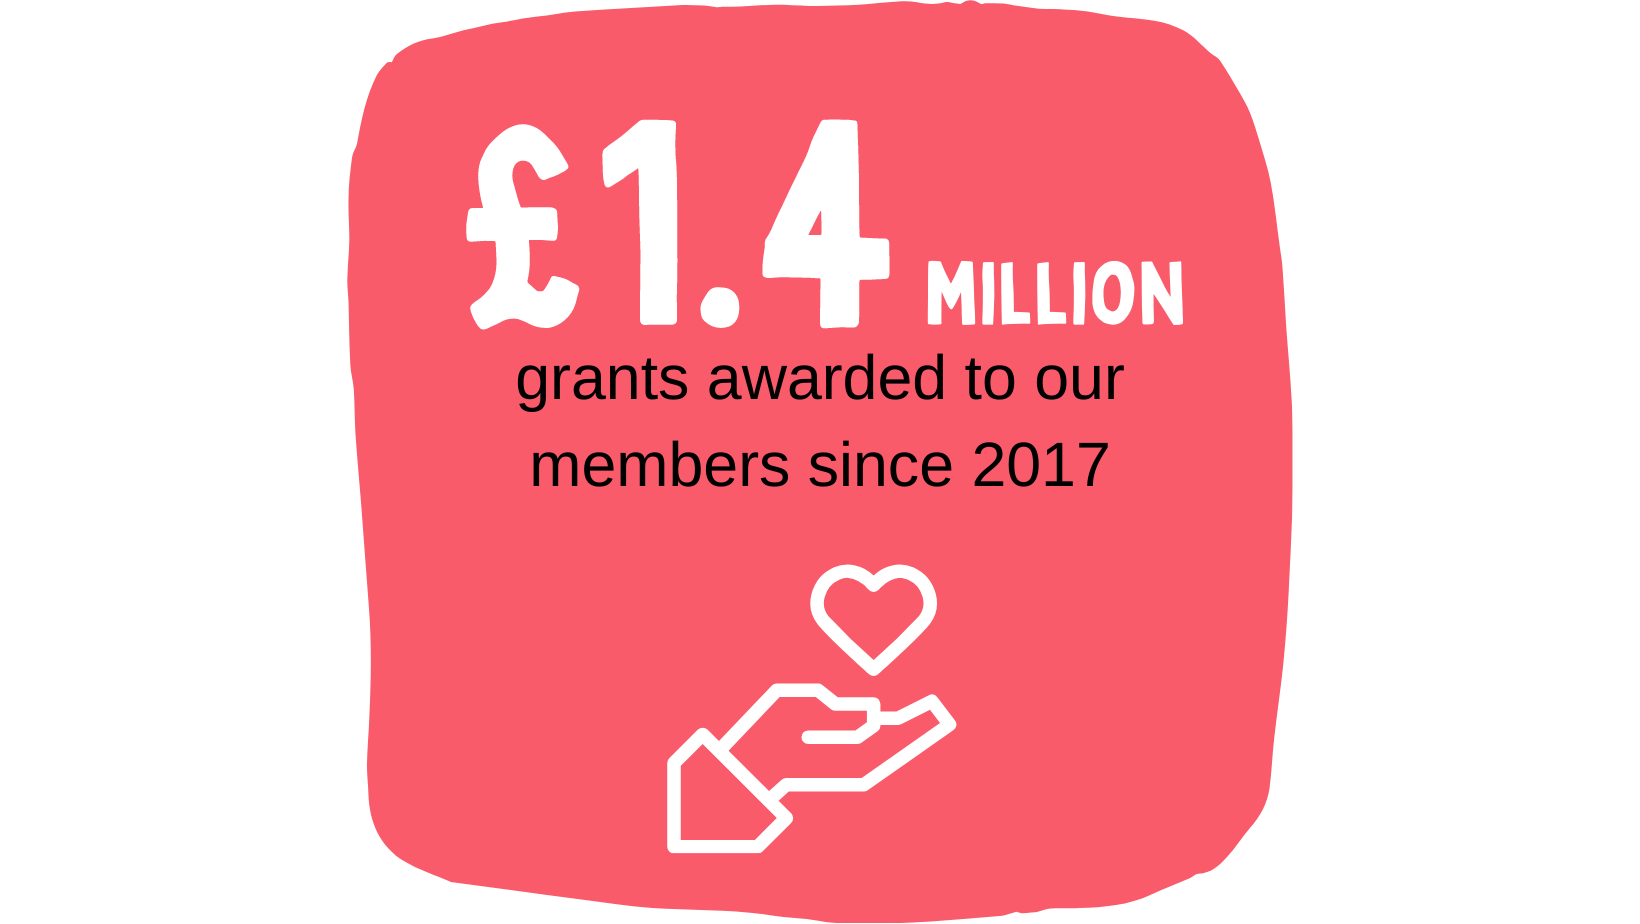 £1.4 million grants awarded to our members since 2017